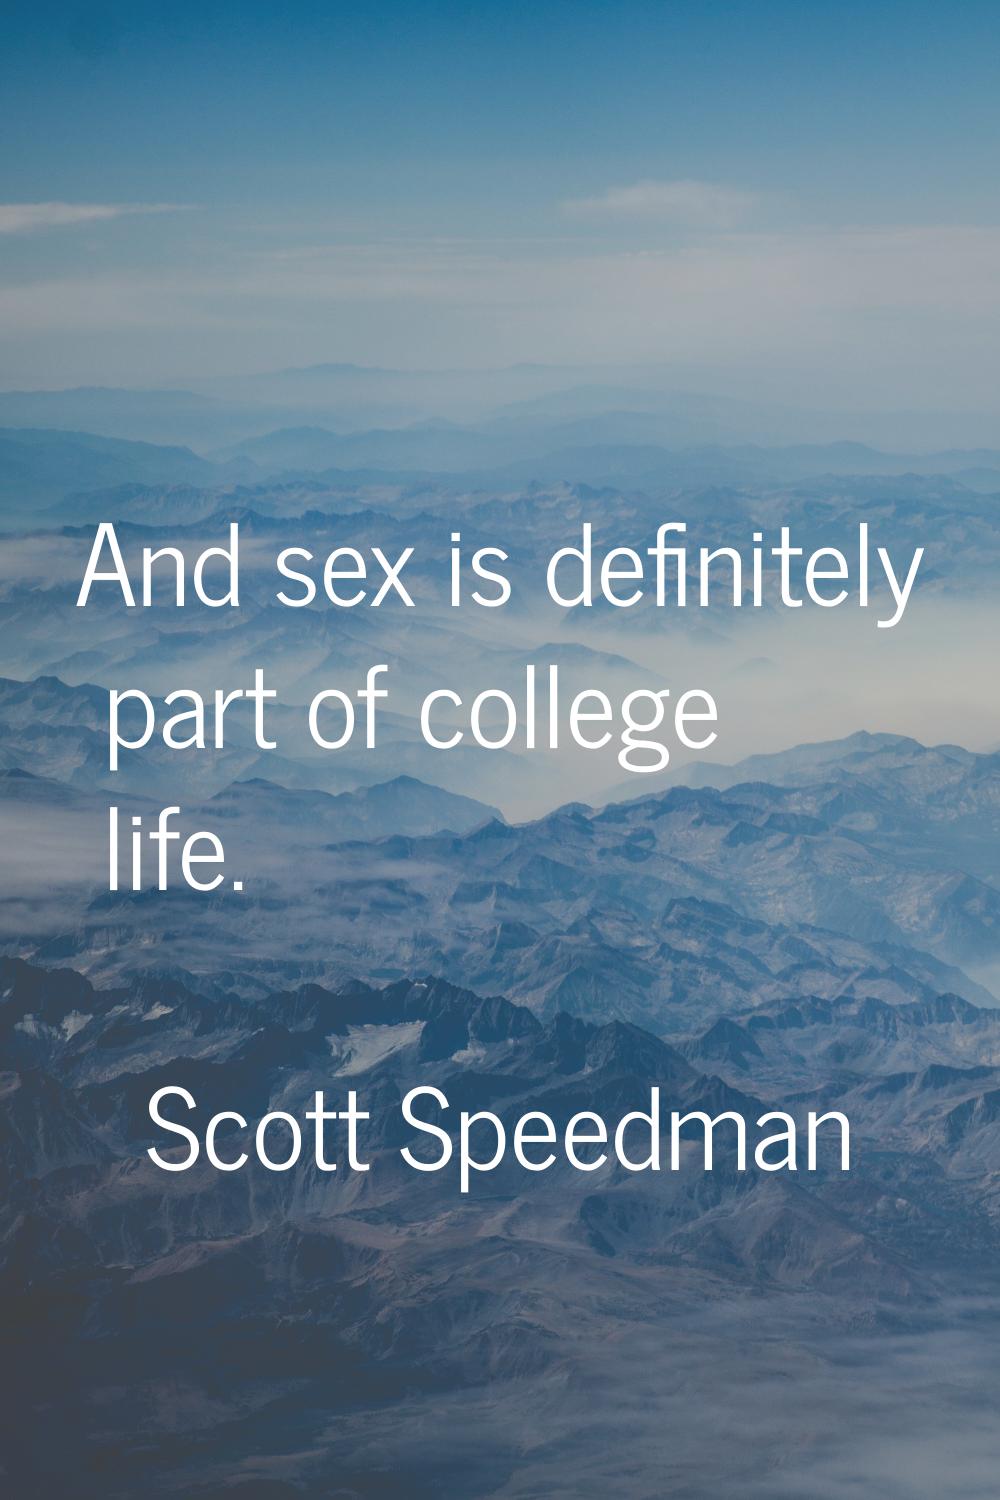 And sex is definitely part of college life.